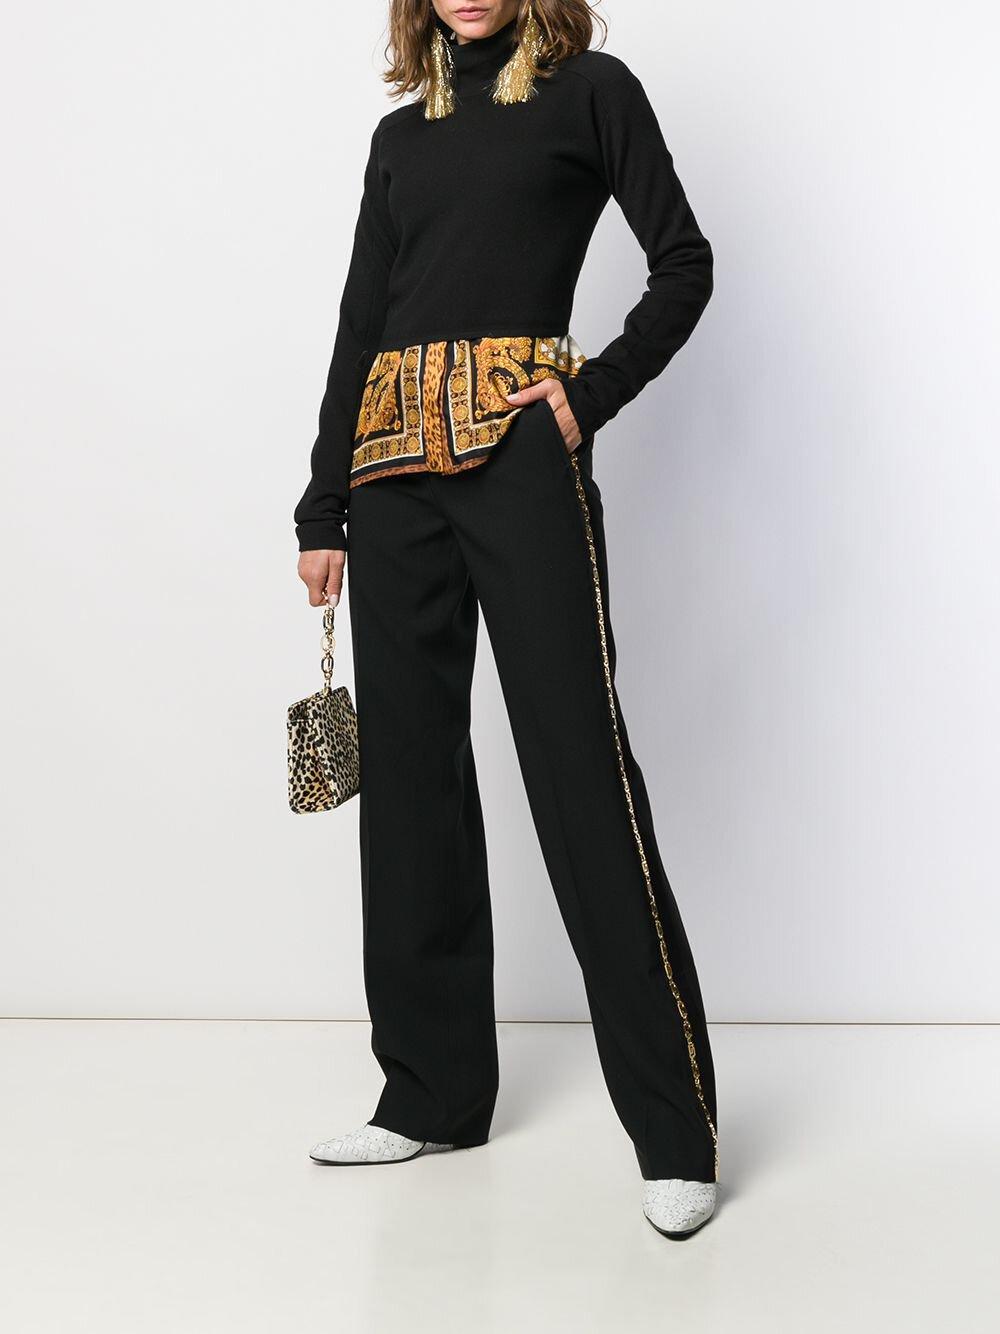 Versace Gold Tone Greca Chain Tailored Black Trousers / Pants

Black Greca-chain tailored trousers from Versace featuring tailored cut, greca chain-link detailing, concealed front fastening, two side slit pockets, two rear welt pockets and straight